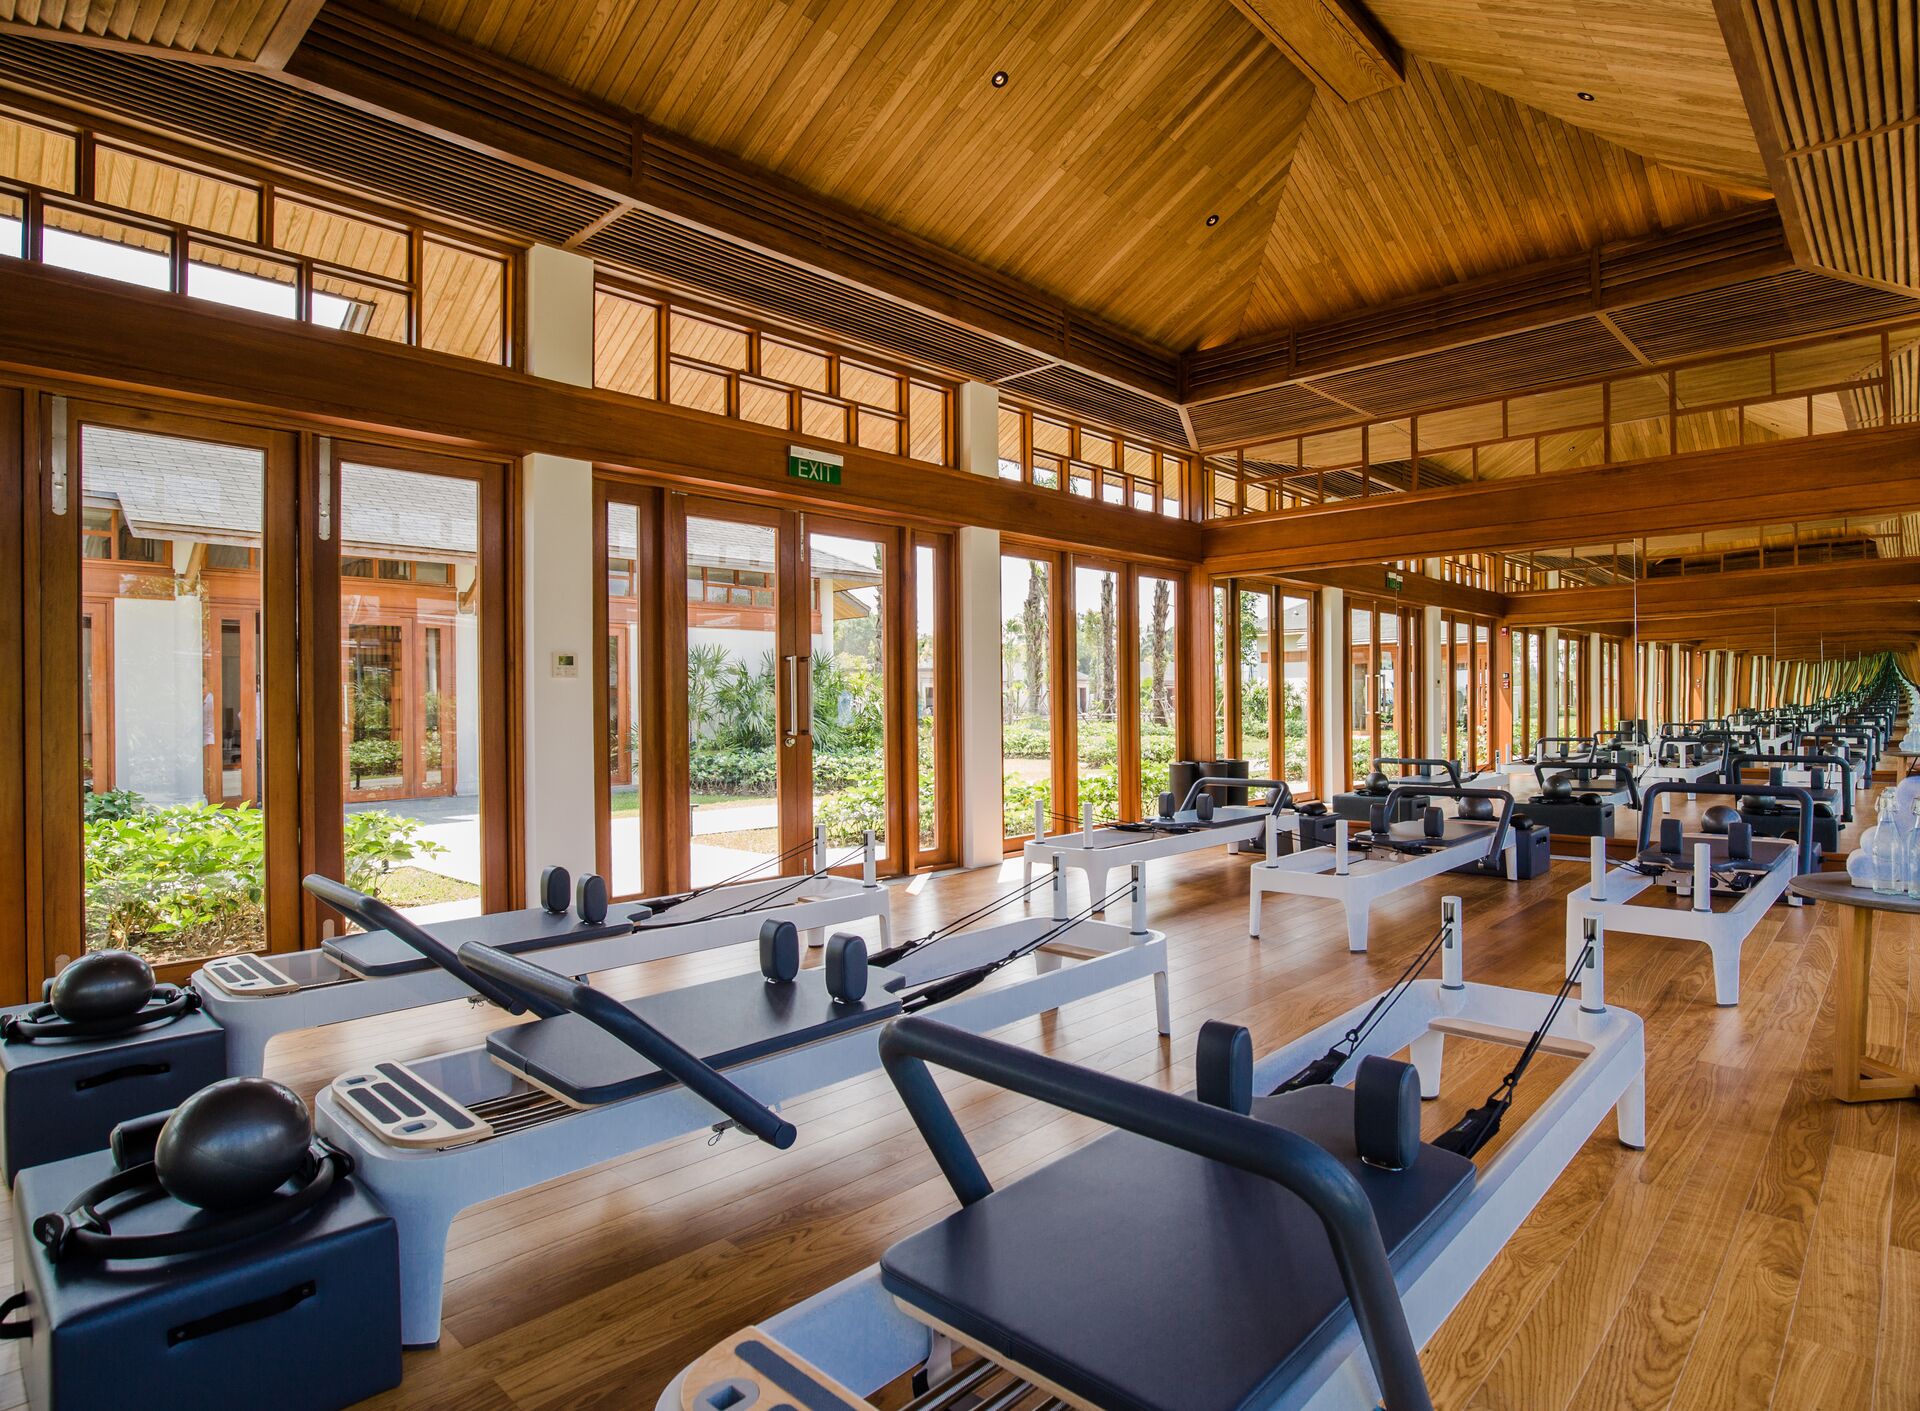 Reformer Pilates Retreat in the oasis of Mekong river